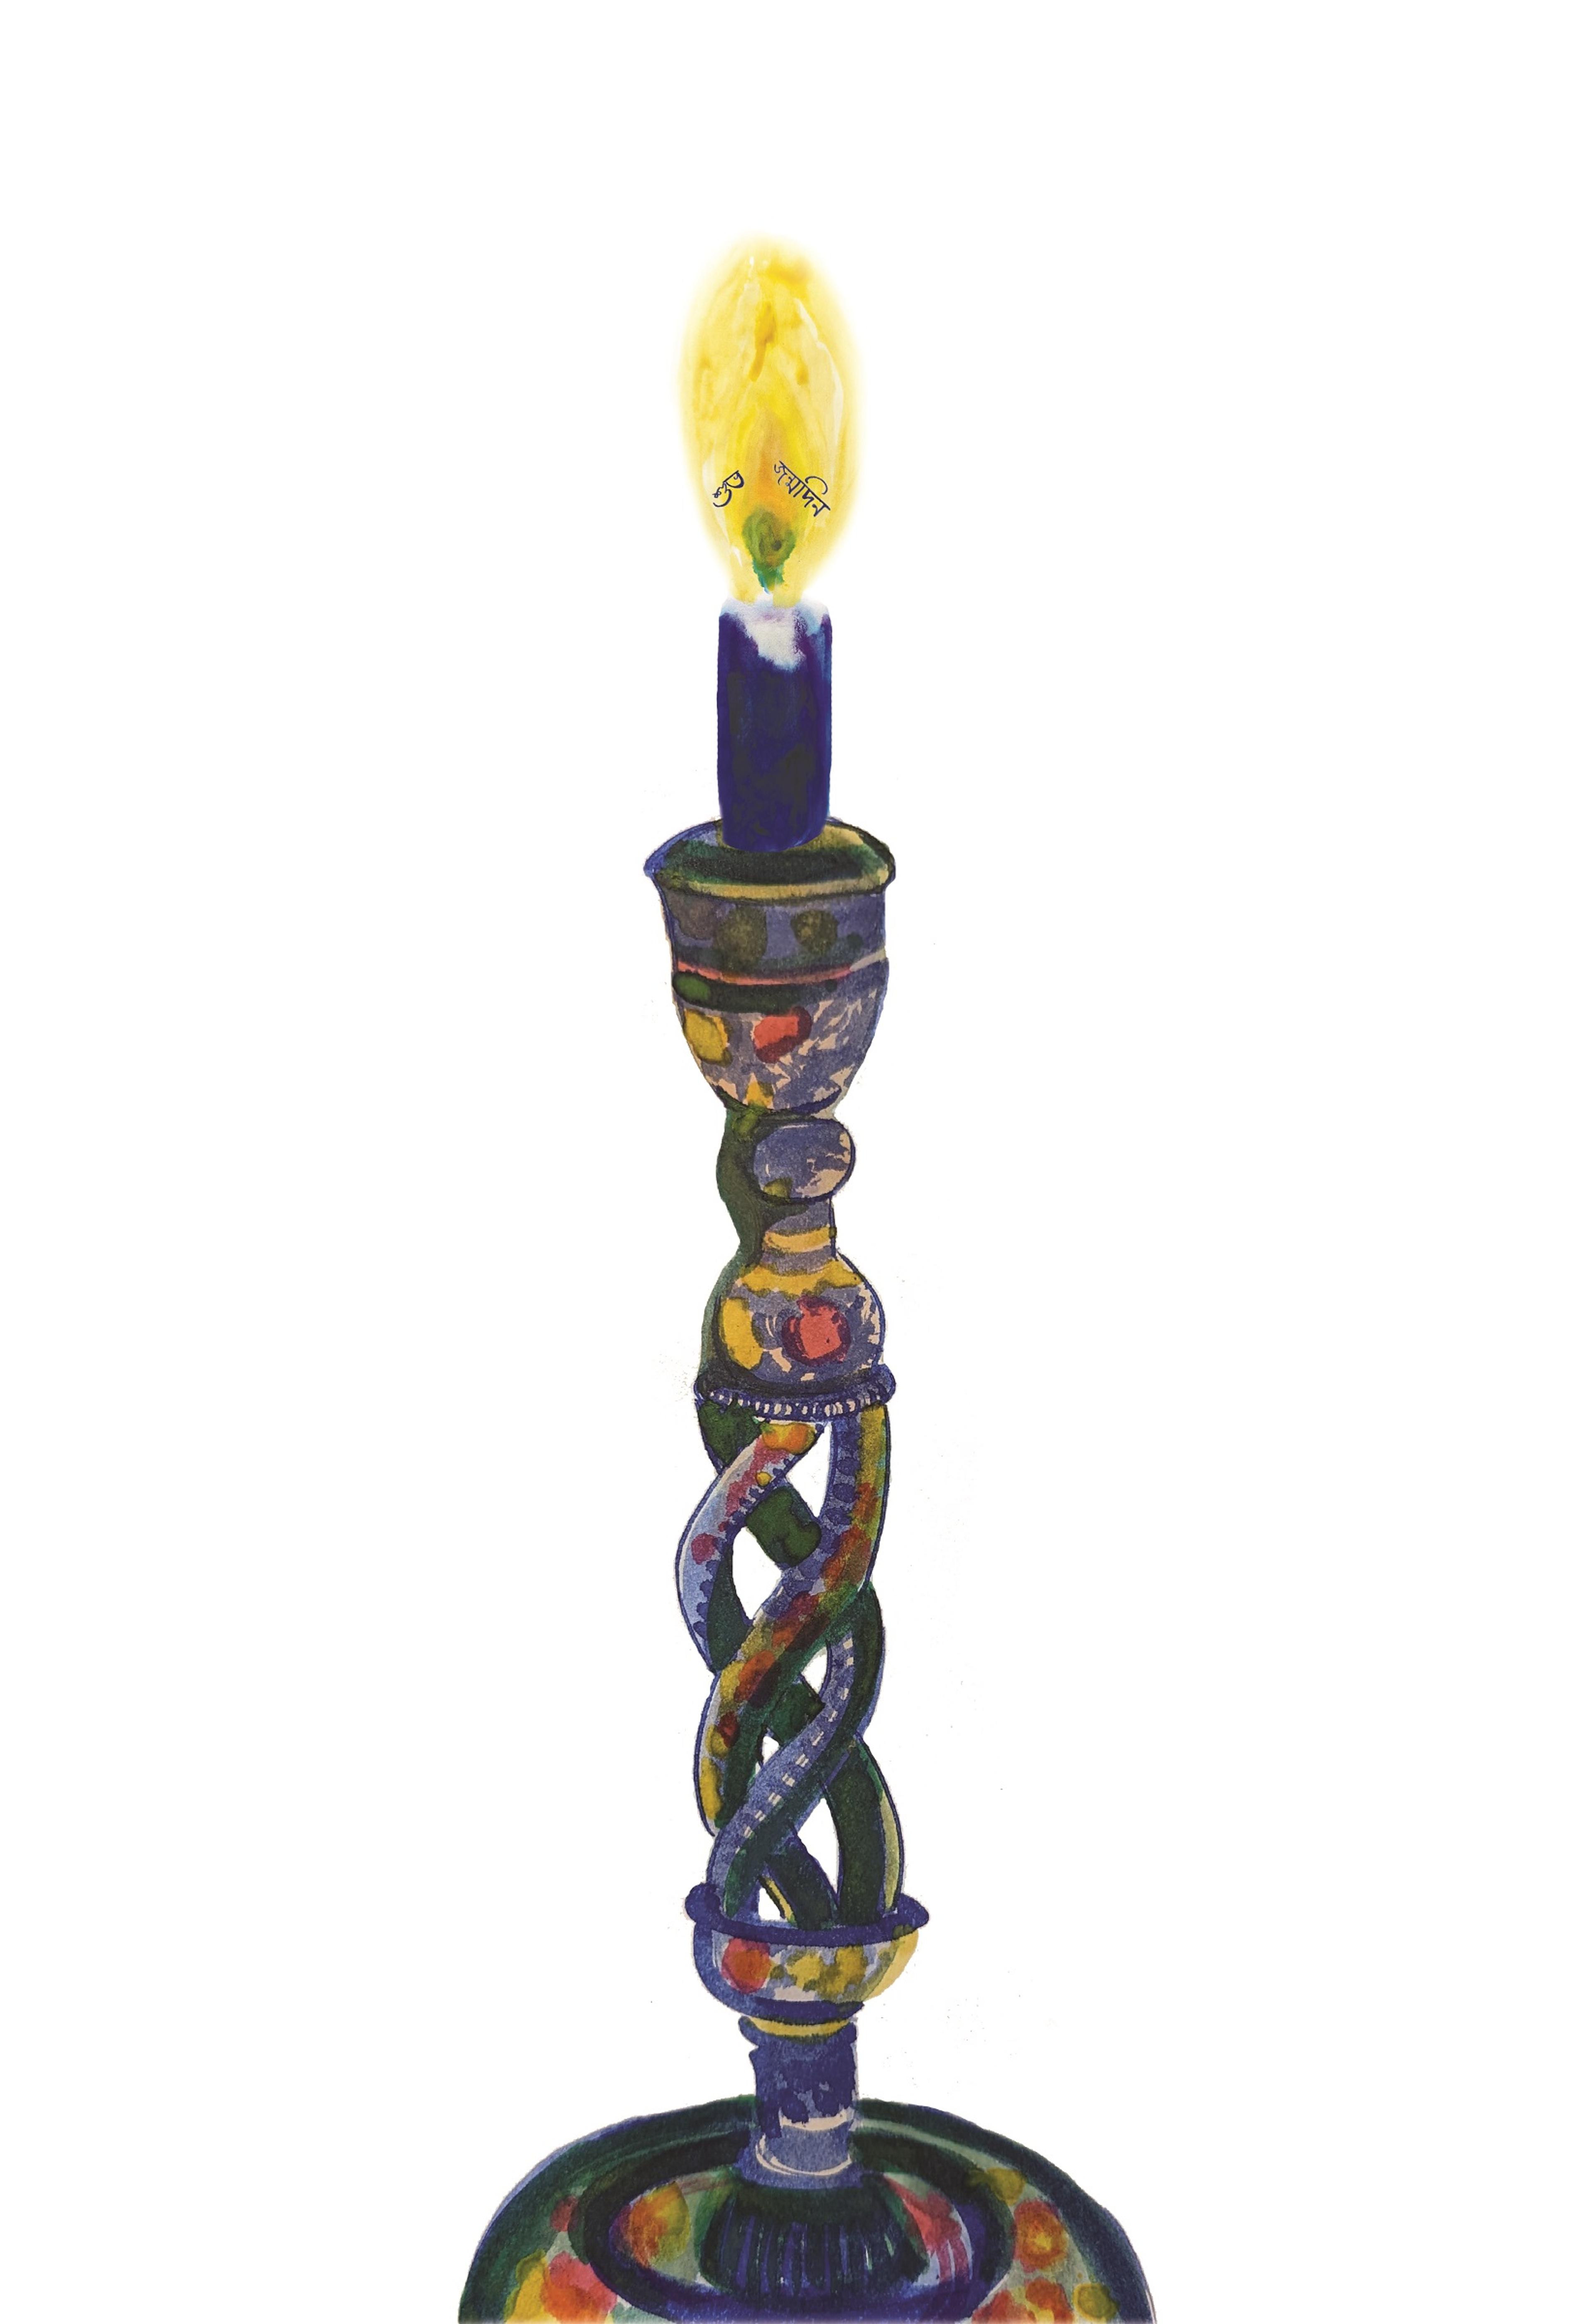 Illustration of a candlestick holding a lit candle with hand-written Bengali type